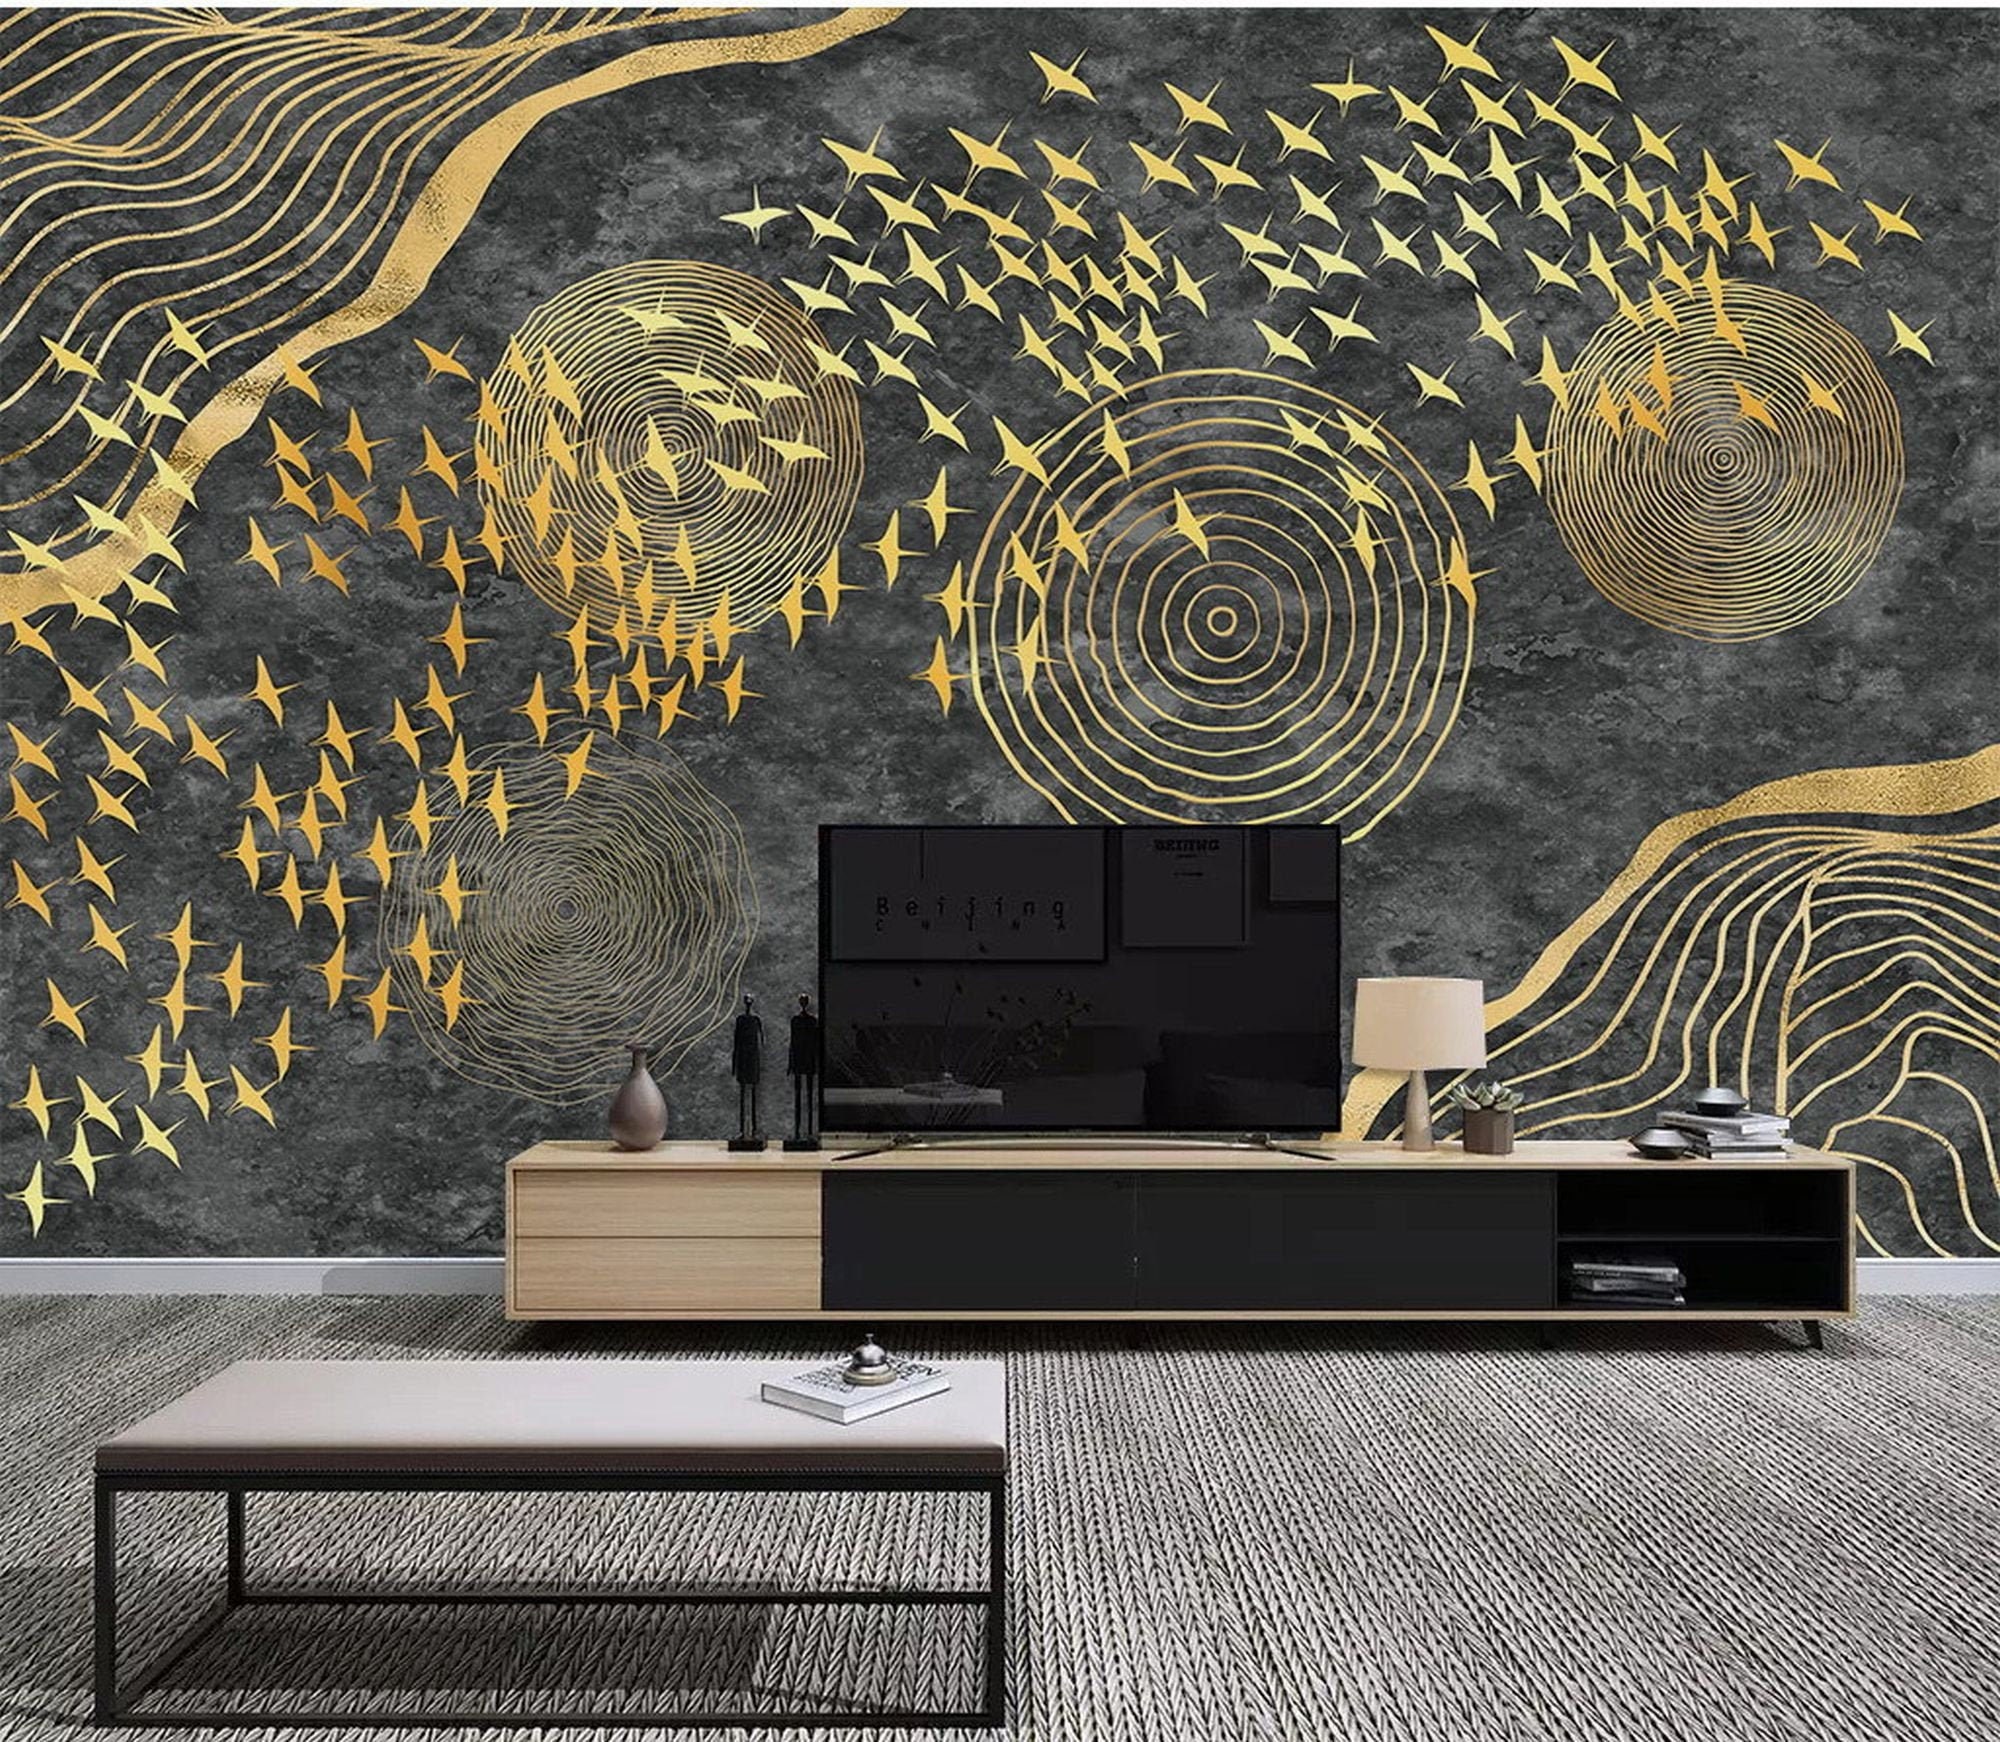 Self Adhesive Peel and Stick Abstract Wallpaper Removable Gray and Gold Line Wall Mural Living Room Bedroom Entryway Cafe